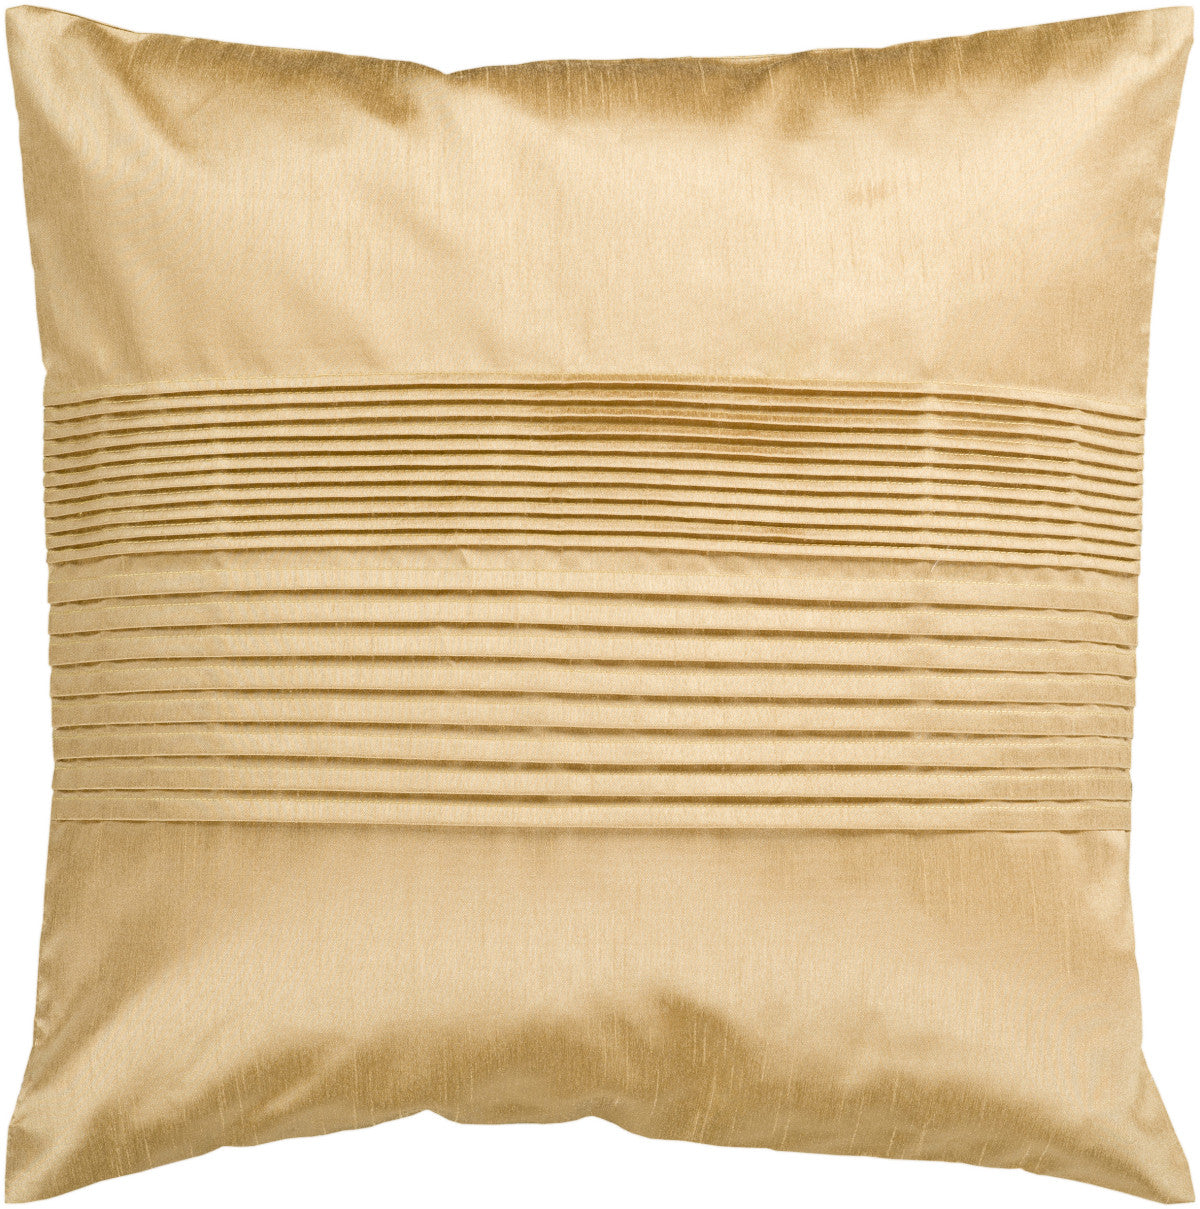 Surya Solid Pleated Lori Lee HH-022 Pillow